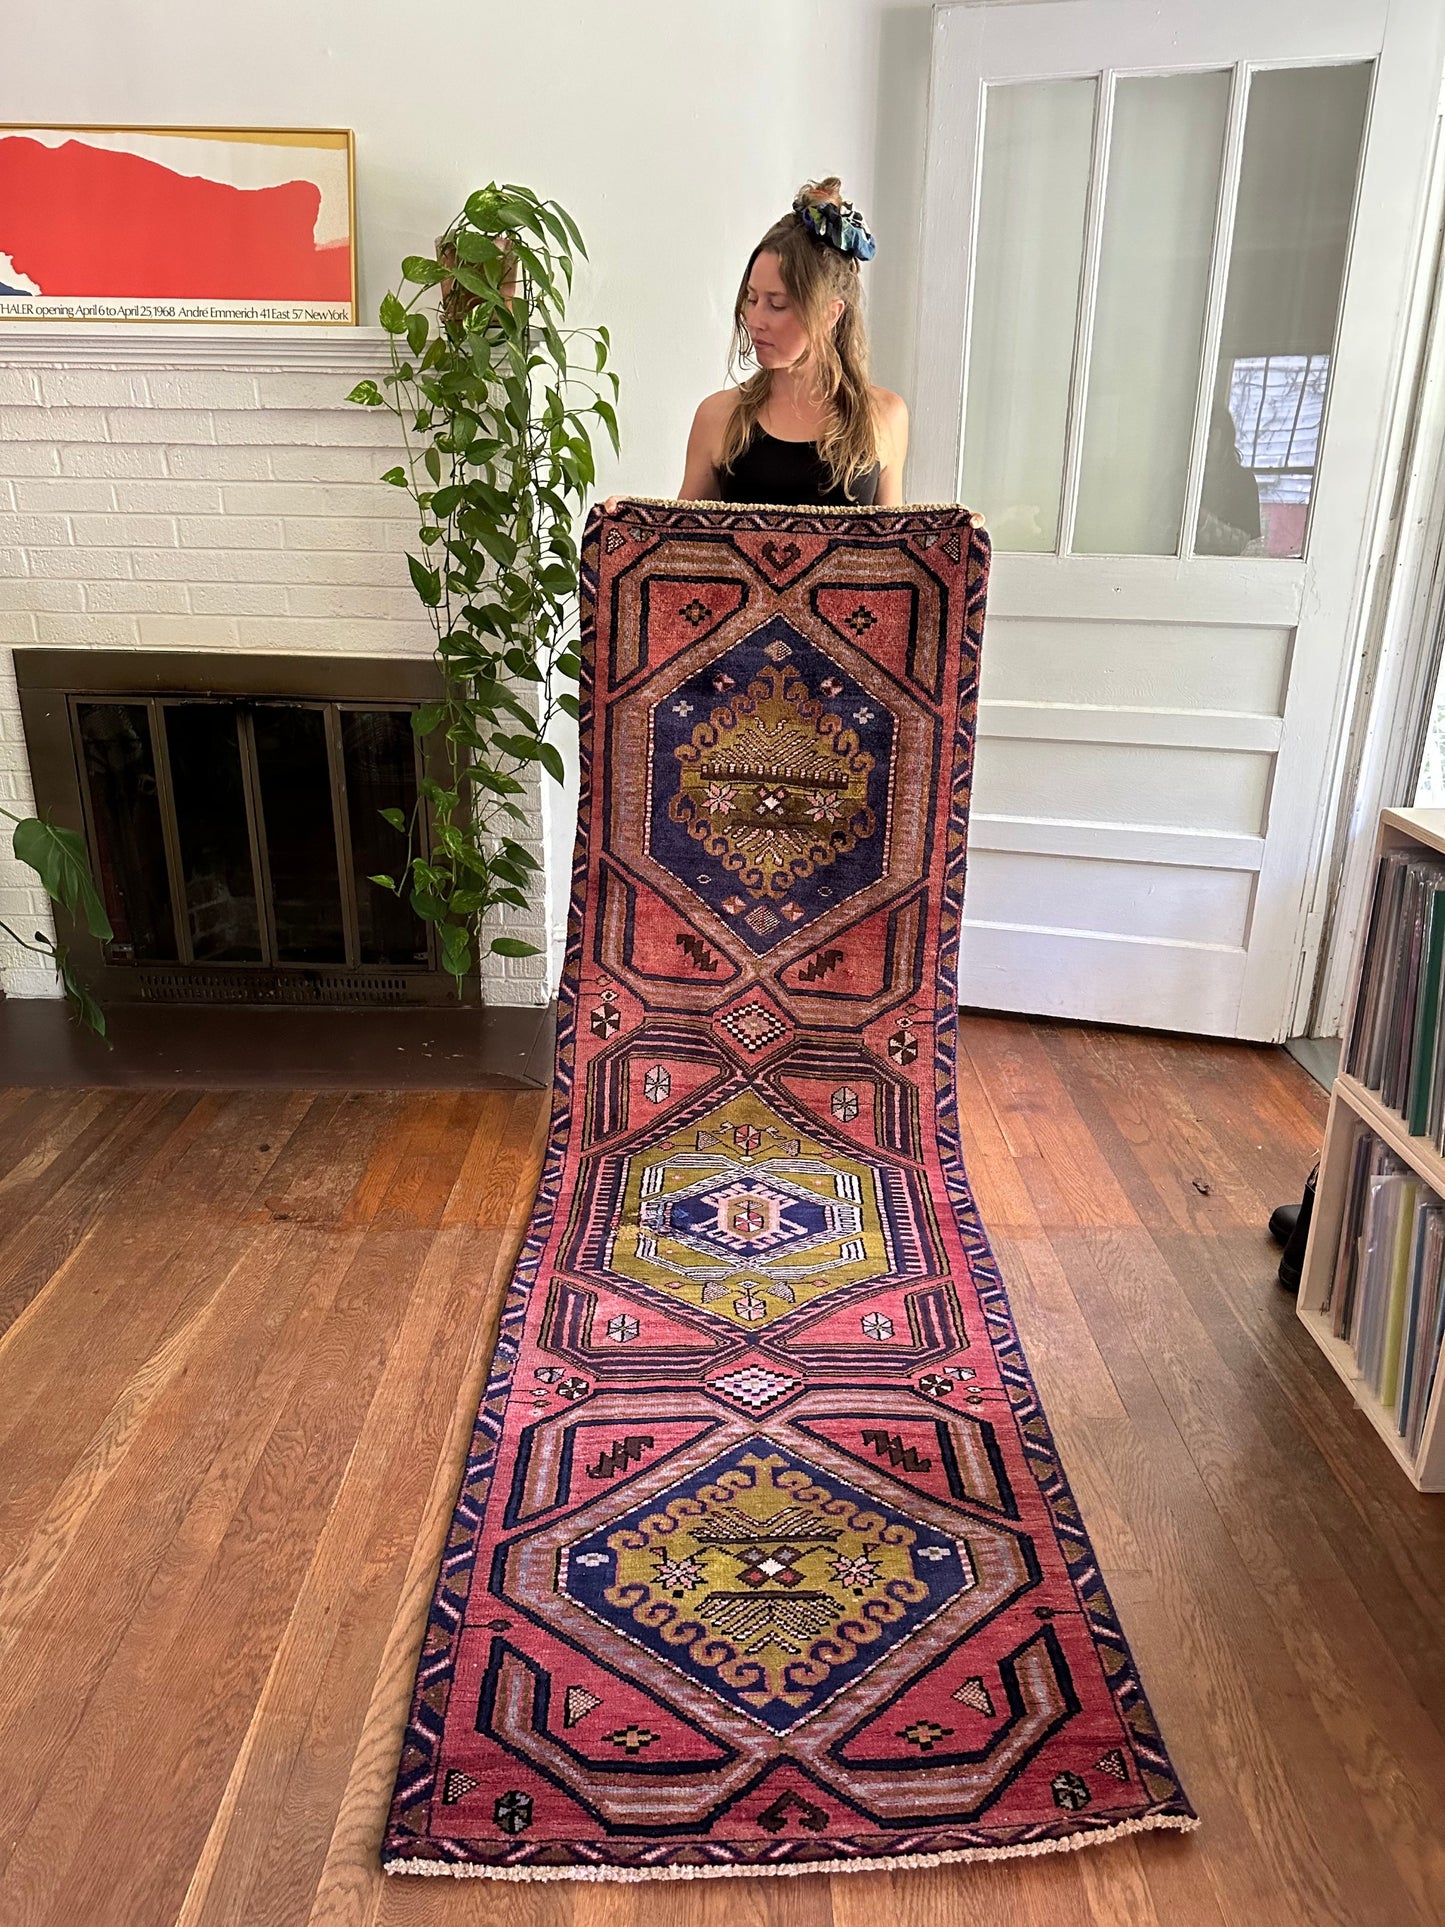 Time-Honored Runner Rug: Vintage Creation, Handwoven with Terracotta Base and Central Indigo plus Mossy Green Designs. The "Abrash" Phenomenon, Reflecting Antique Dye Variations, Adds Character. Wear Evident, Yet Maintains a Good Vintage Condition.